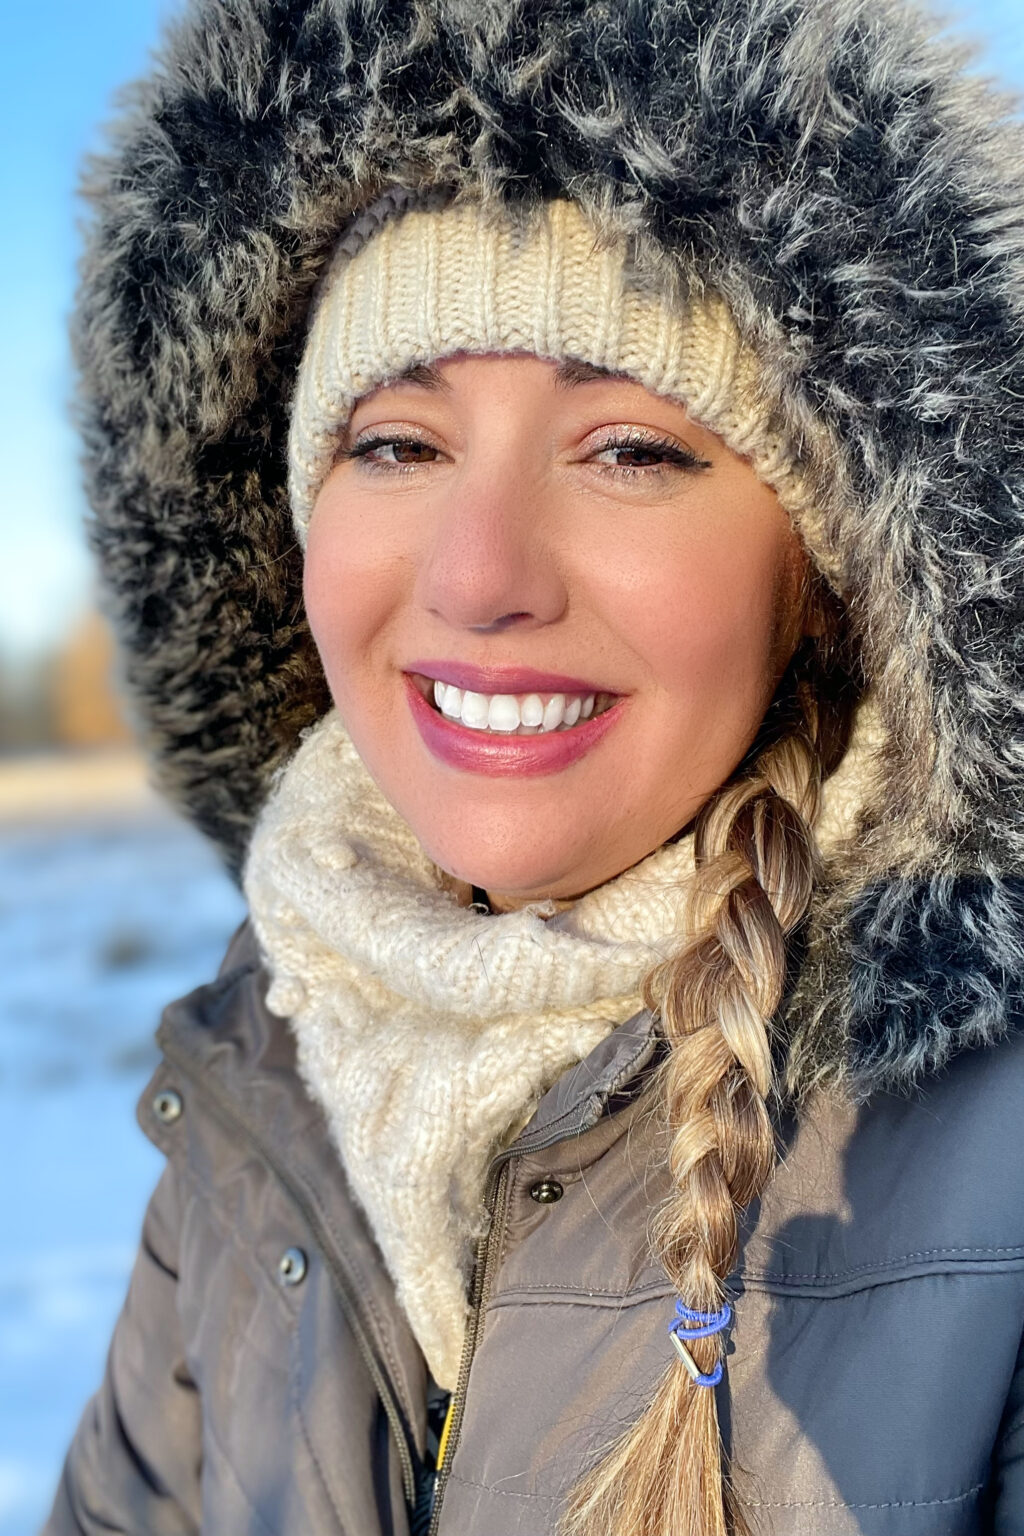 Person smiling with tan hat and scarf with grey jacket and snow in backgorund